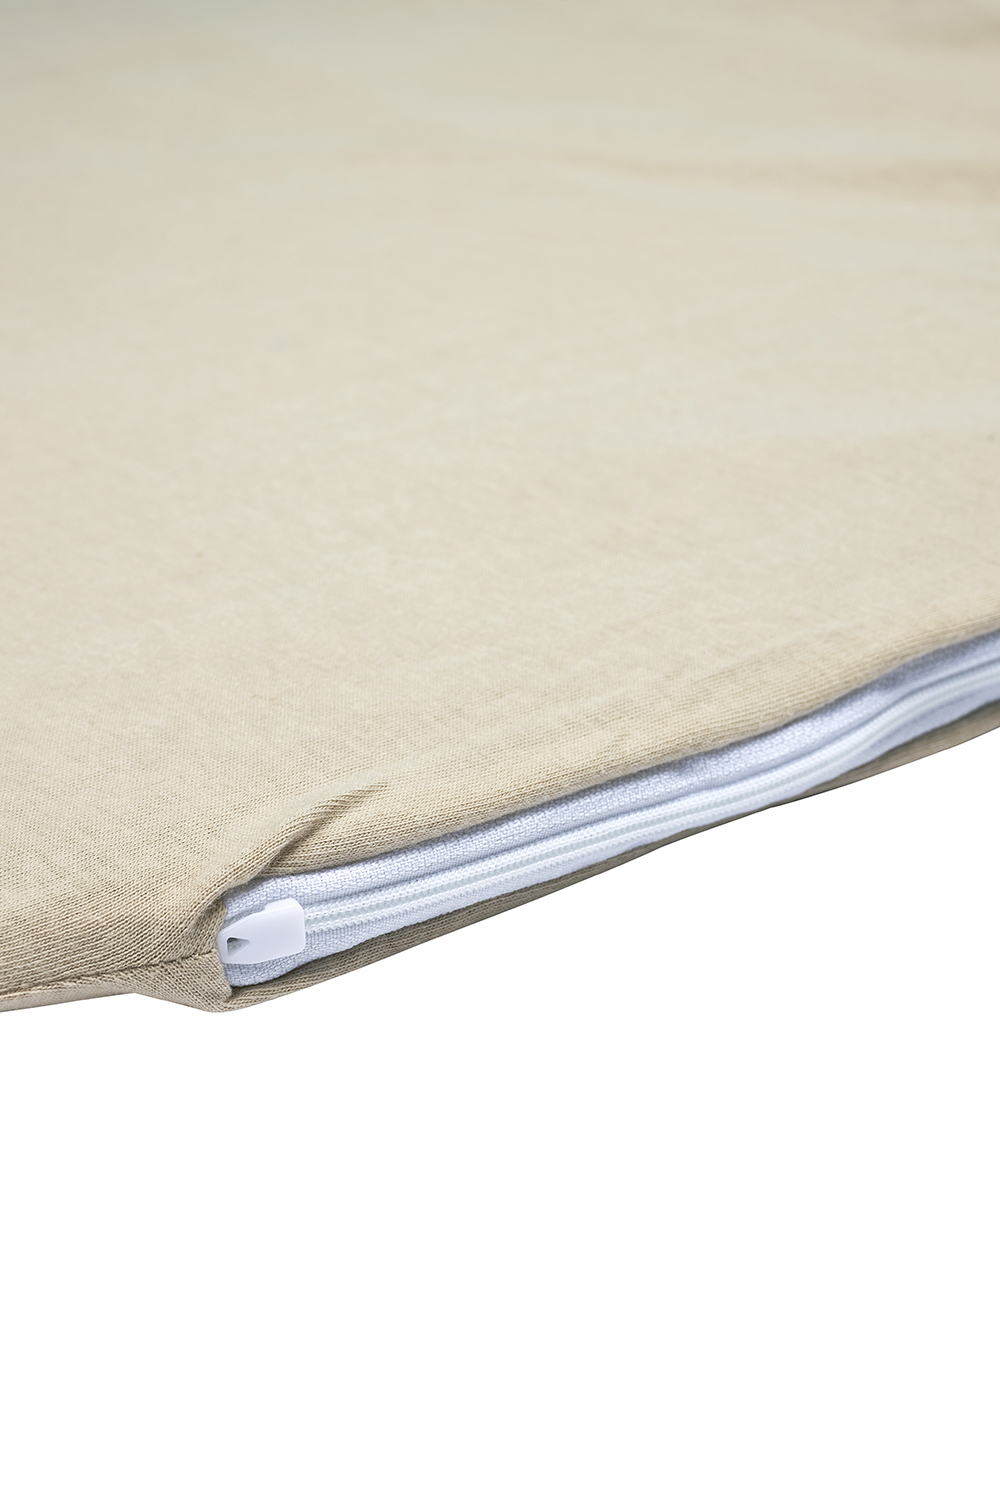 Camping bed mattress cover deluxe Uni - sand - 60x120cm